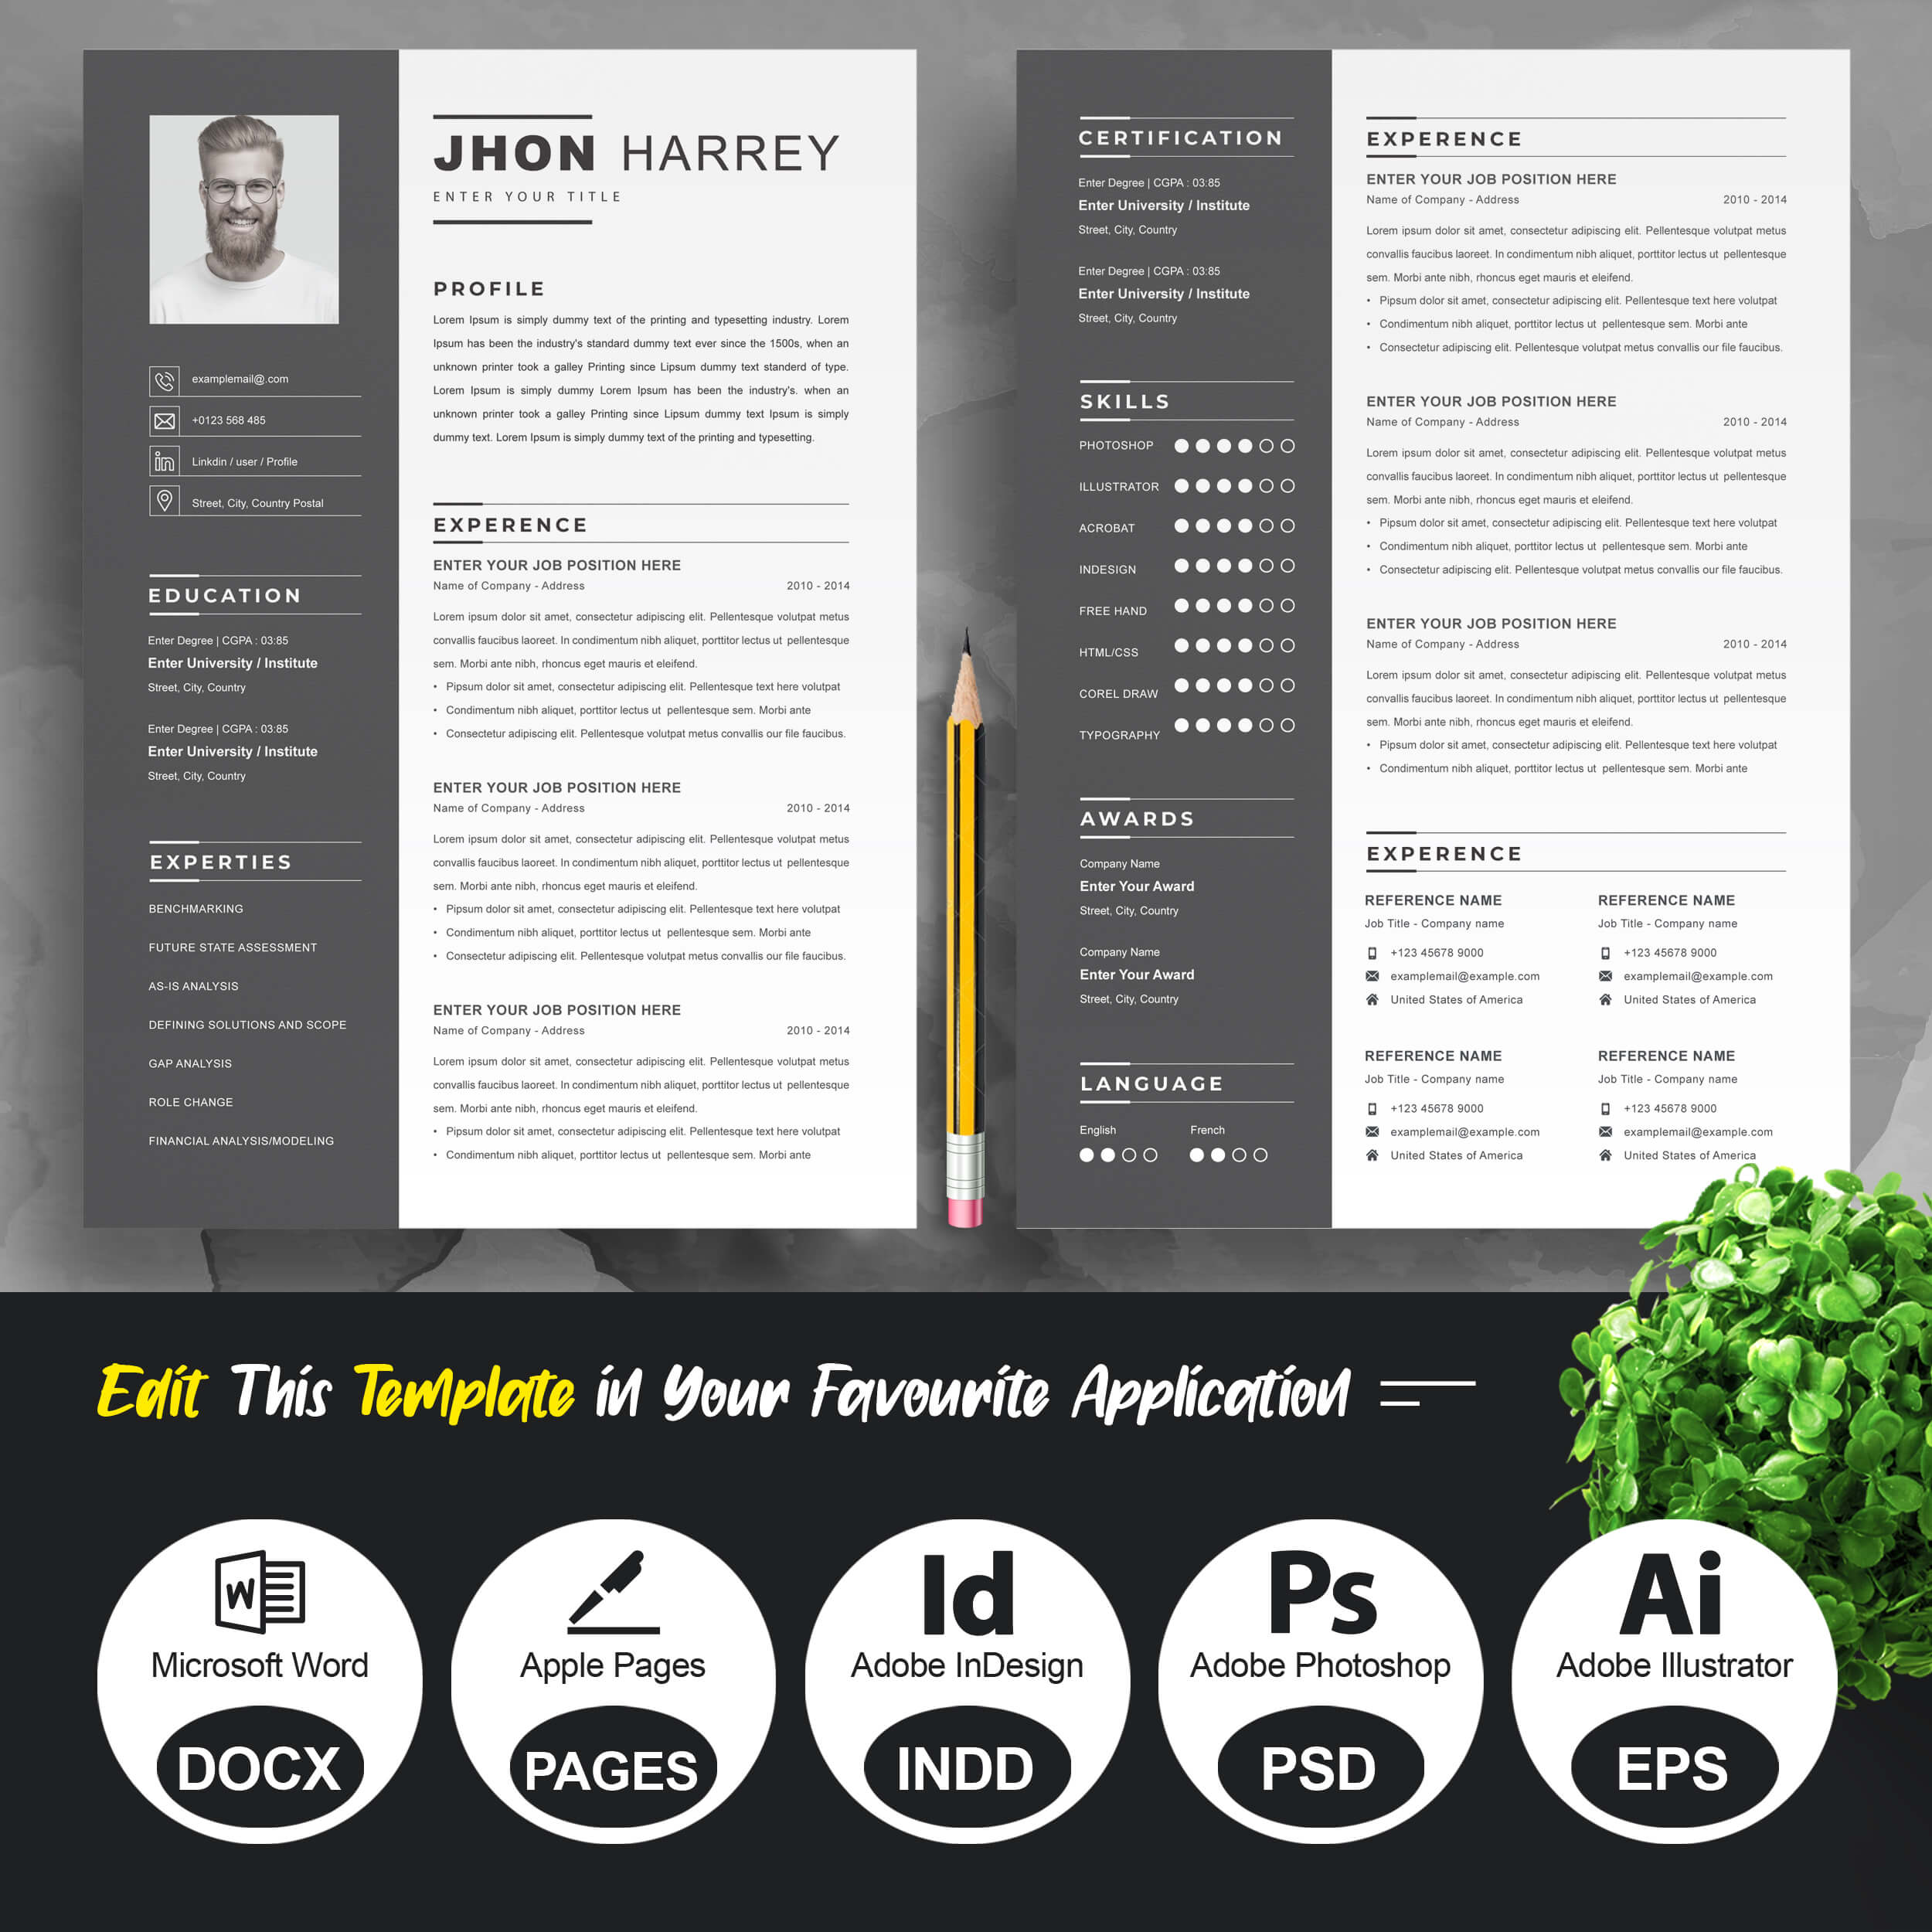 Minimalistic Timeline Resume Template | Professional CV Template preview image.